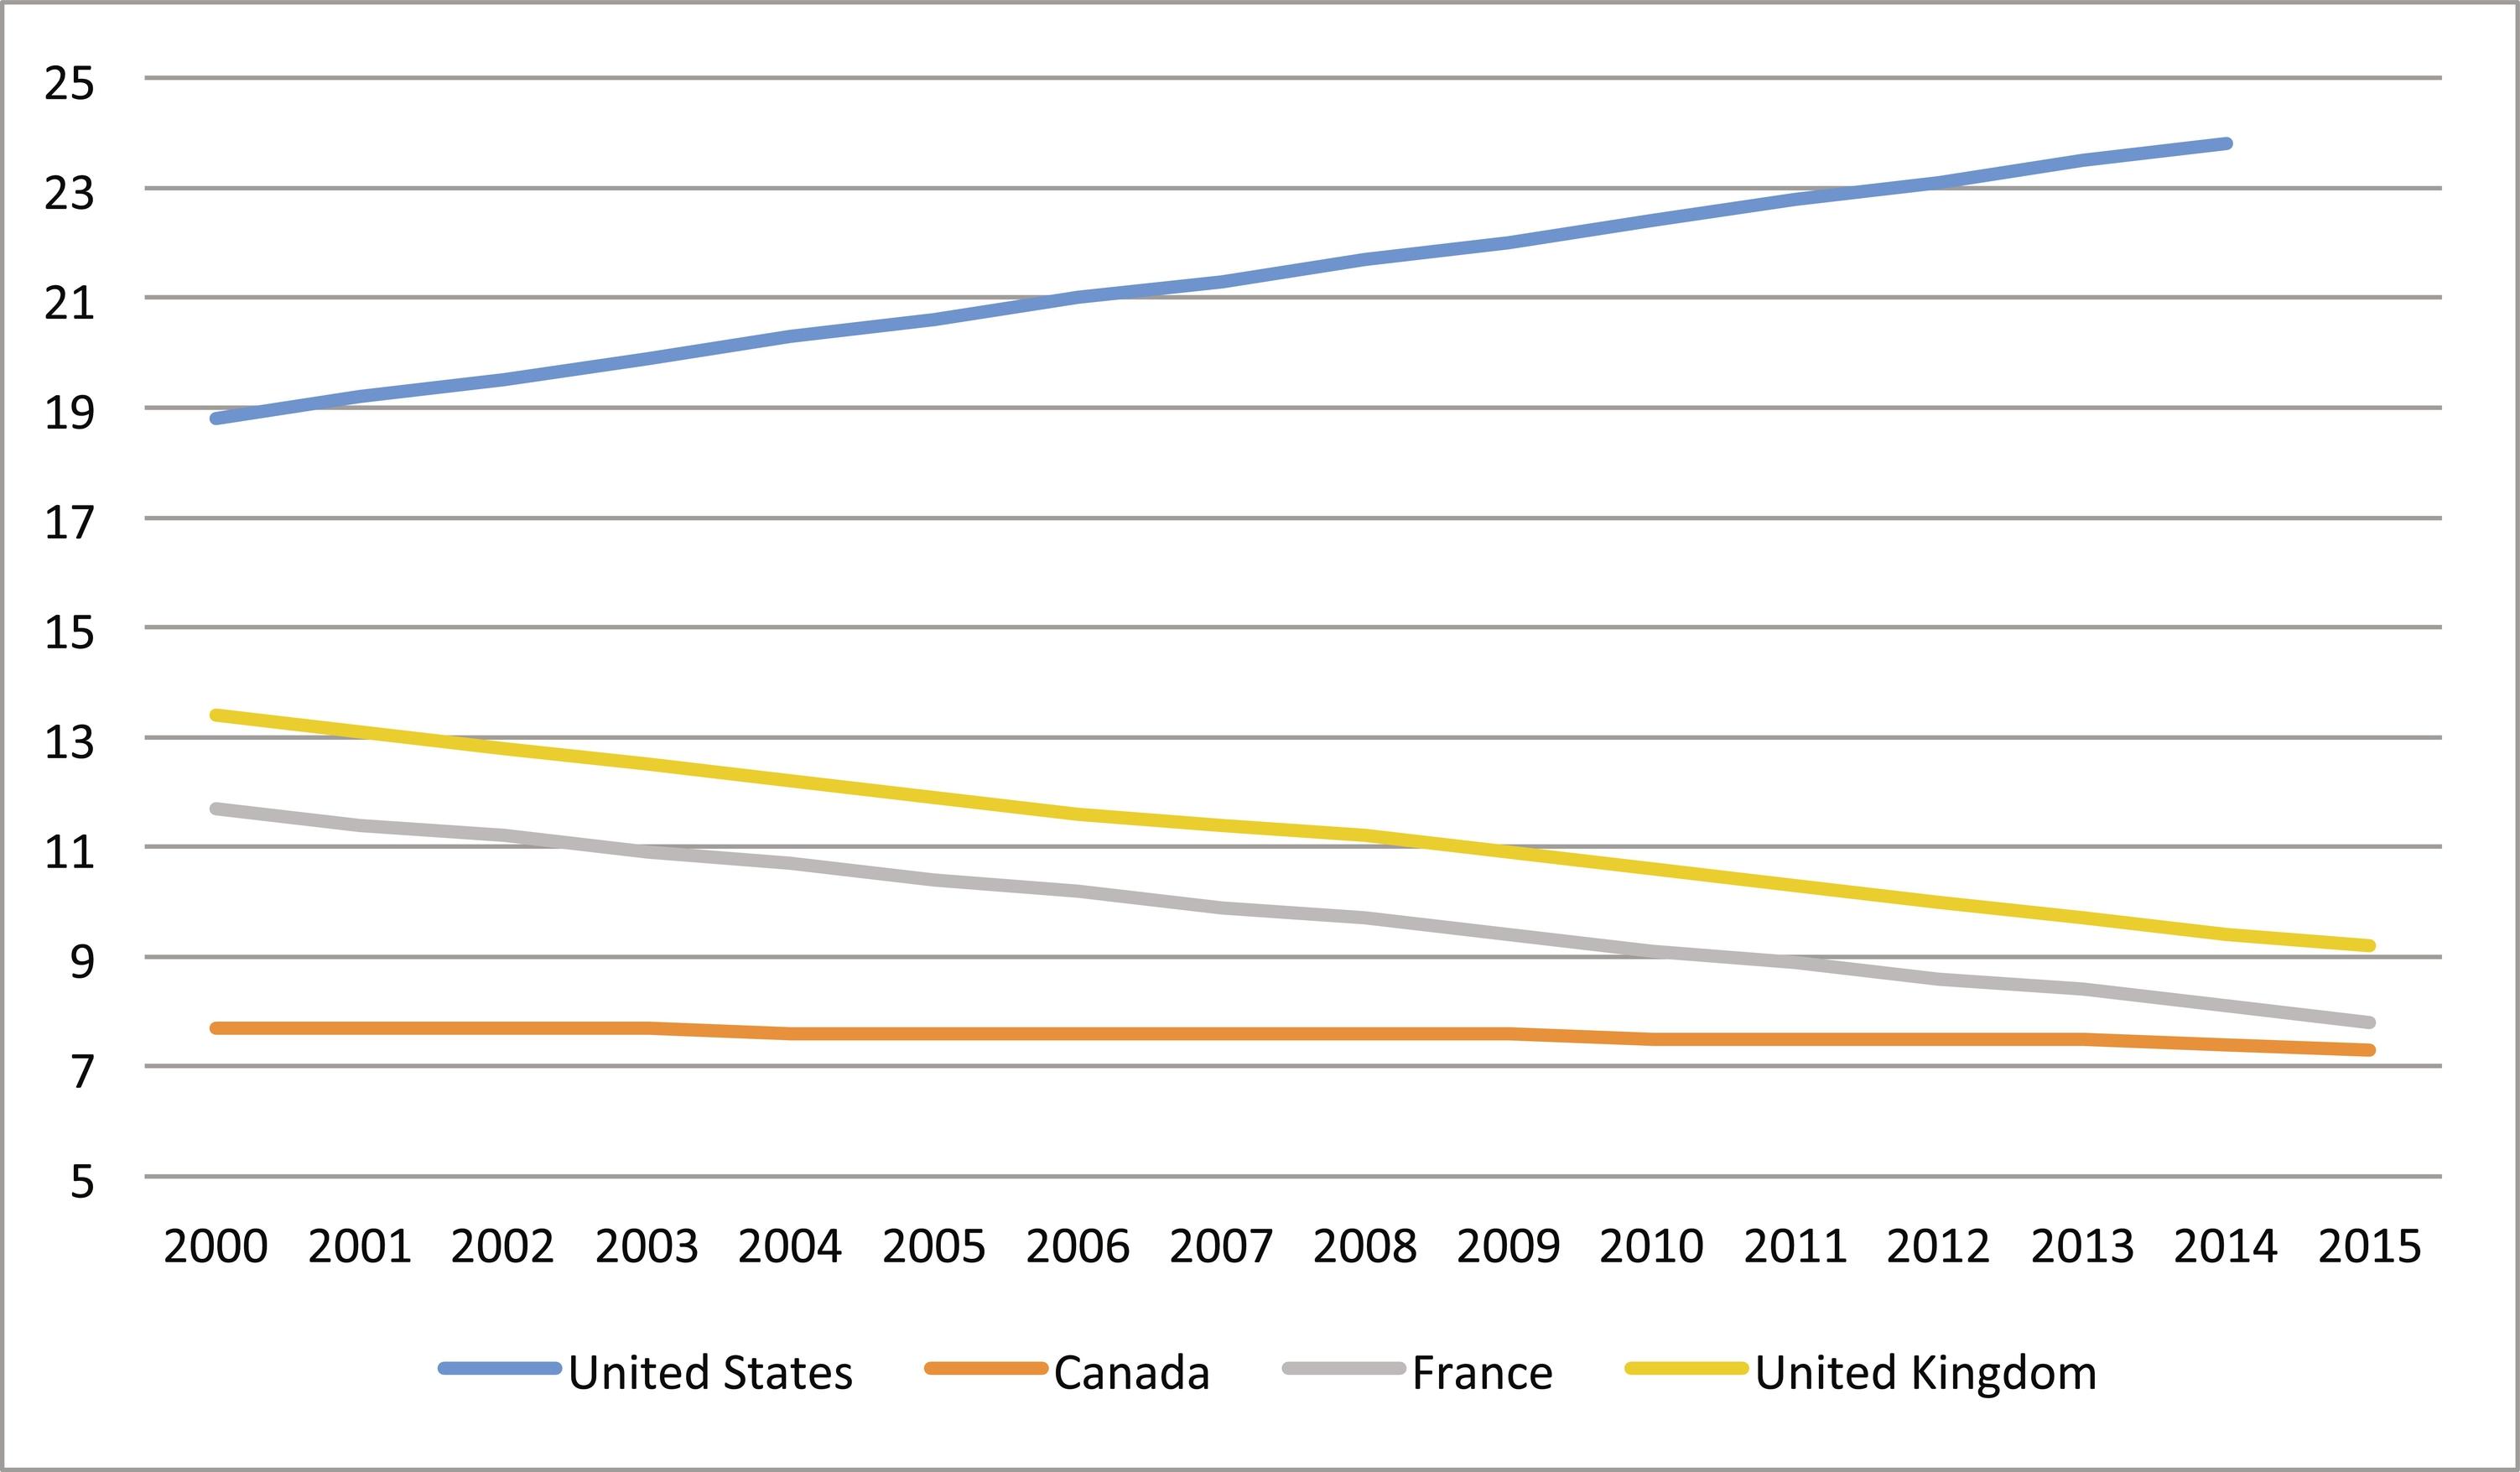 Fig. 29.1, Estimated mortality in the United States, Canada, France, and the United Kingdom, from 2000 to 2015, in deaths per 100,000 live births.